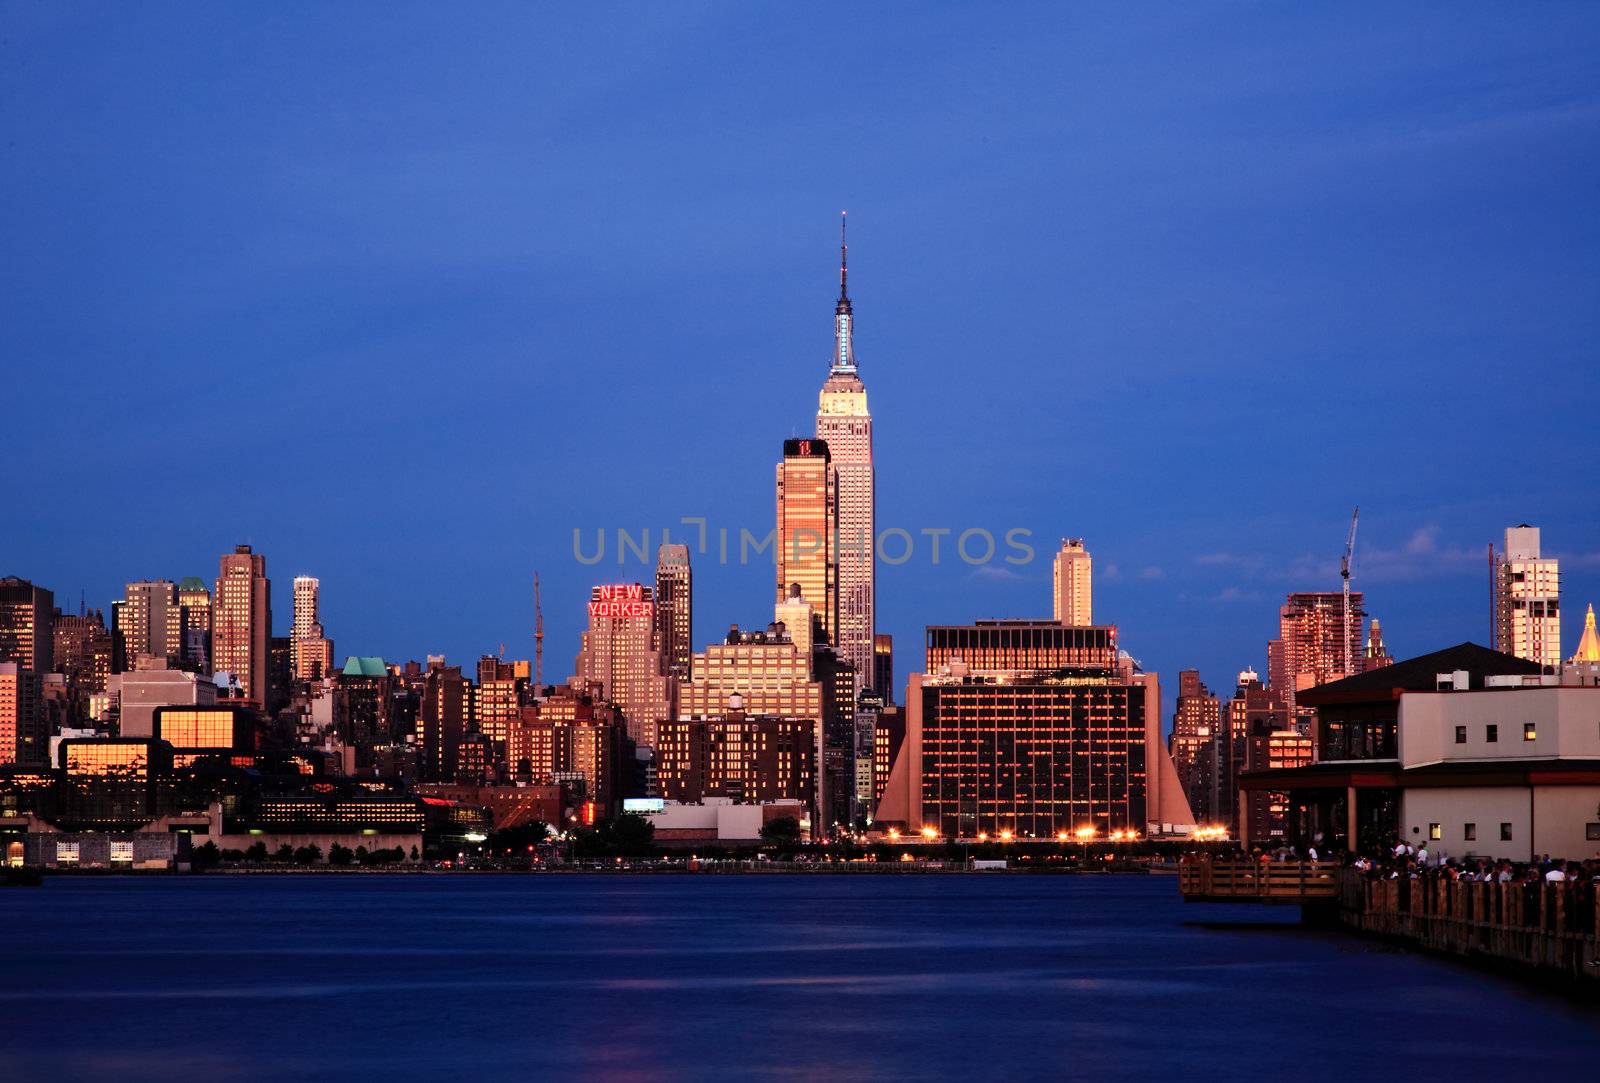 The Empire State Building lighting up red, white, and blue by gary718